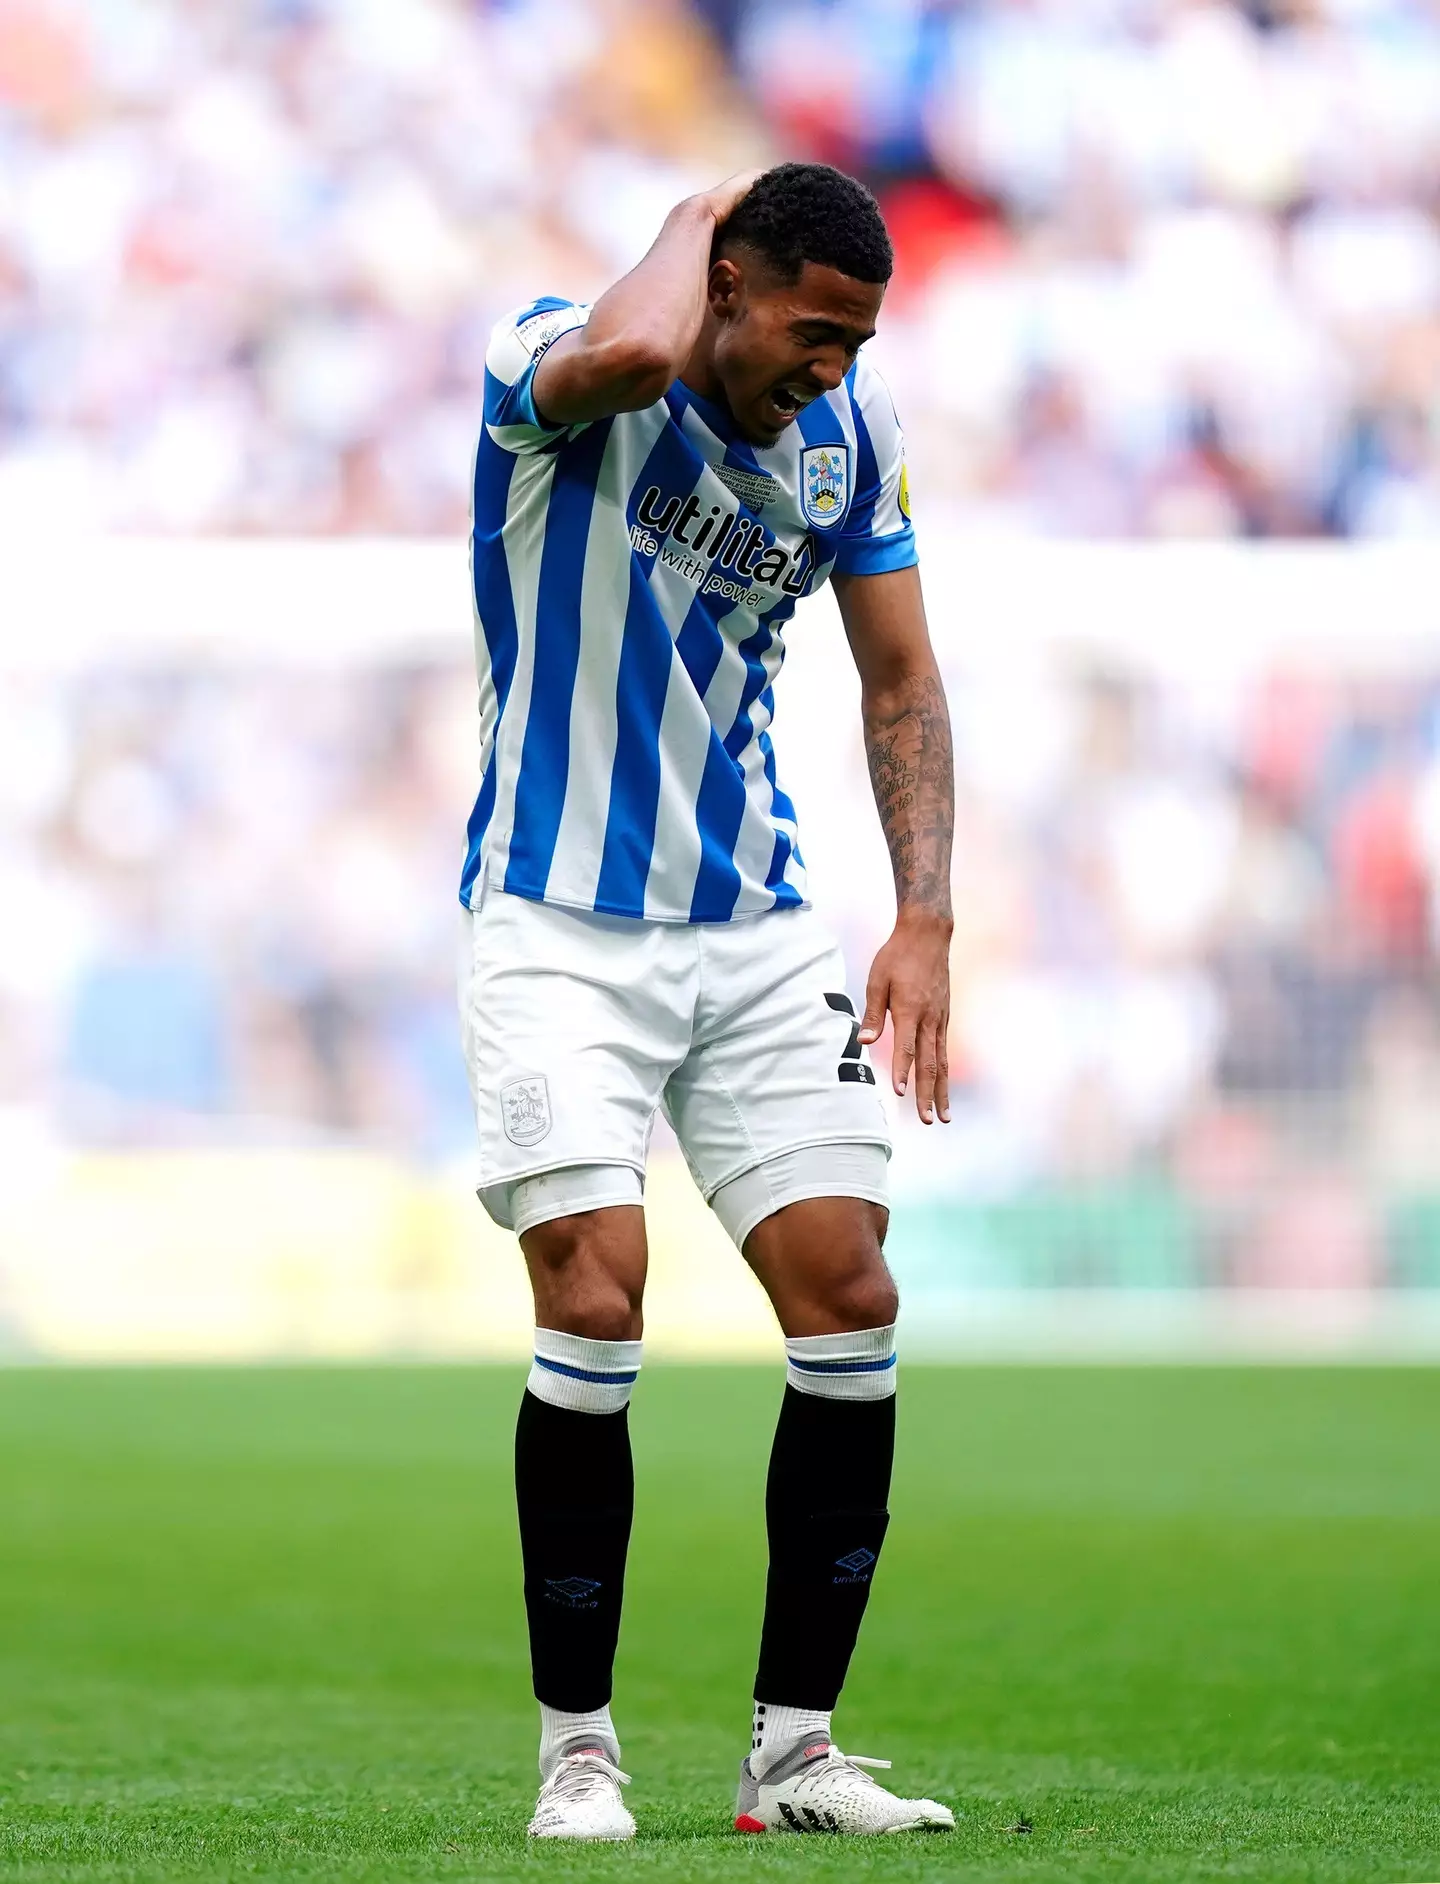 Huddersfield Town's Levi Colwill appears dejected during the Sky Bet Championship play-off final at Wembley Stadium, London. (Alamy)